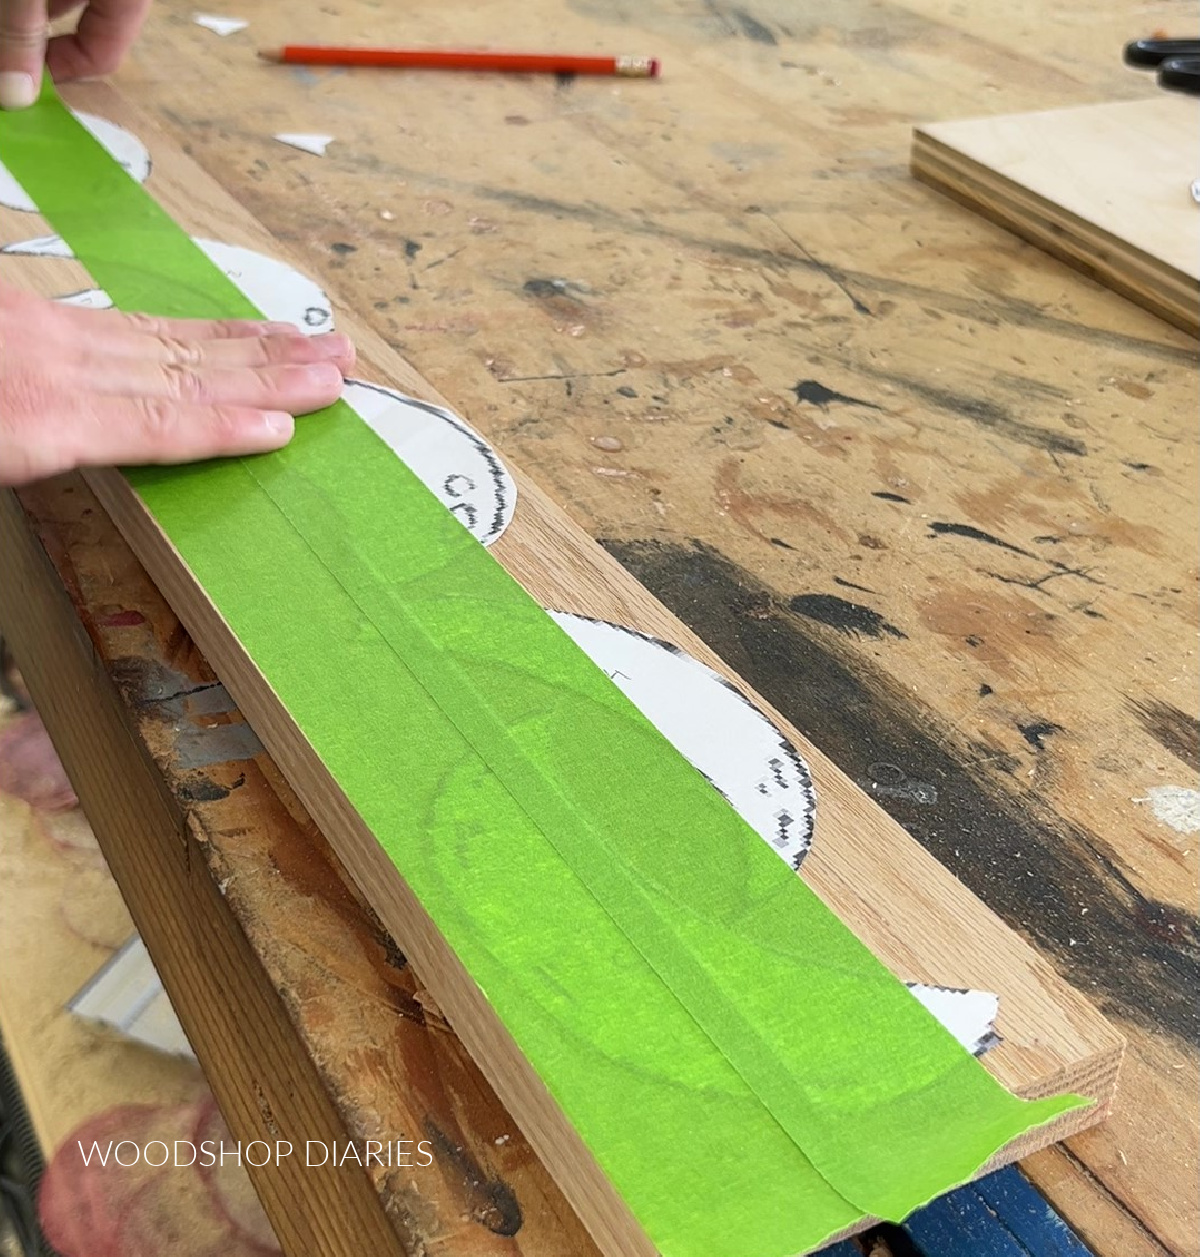 Shara Woodshop Diaries applying painters tape over paper cut outs laid out on red oak board